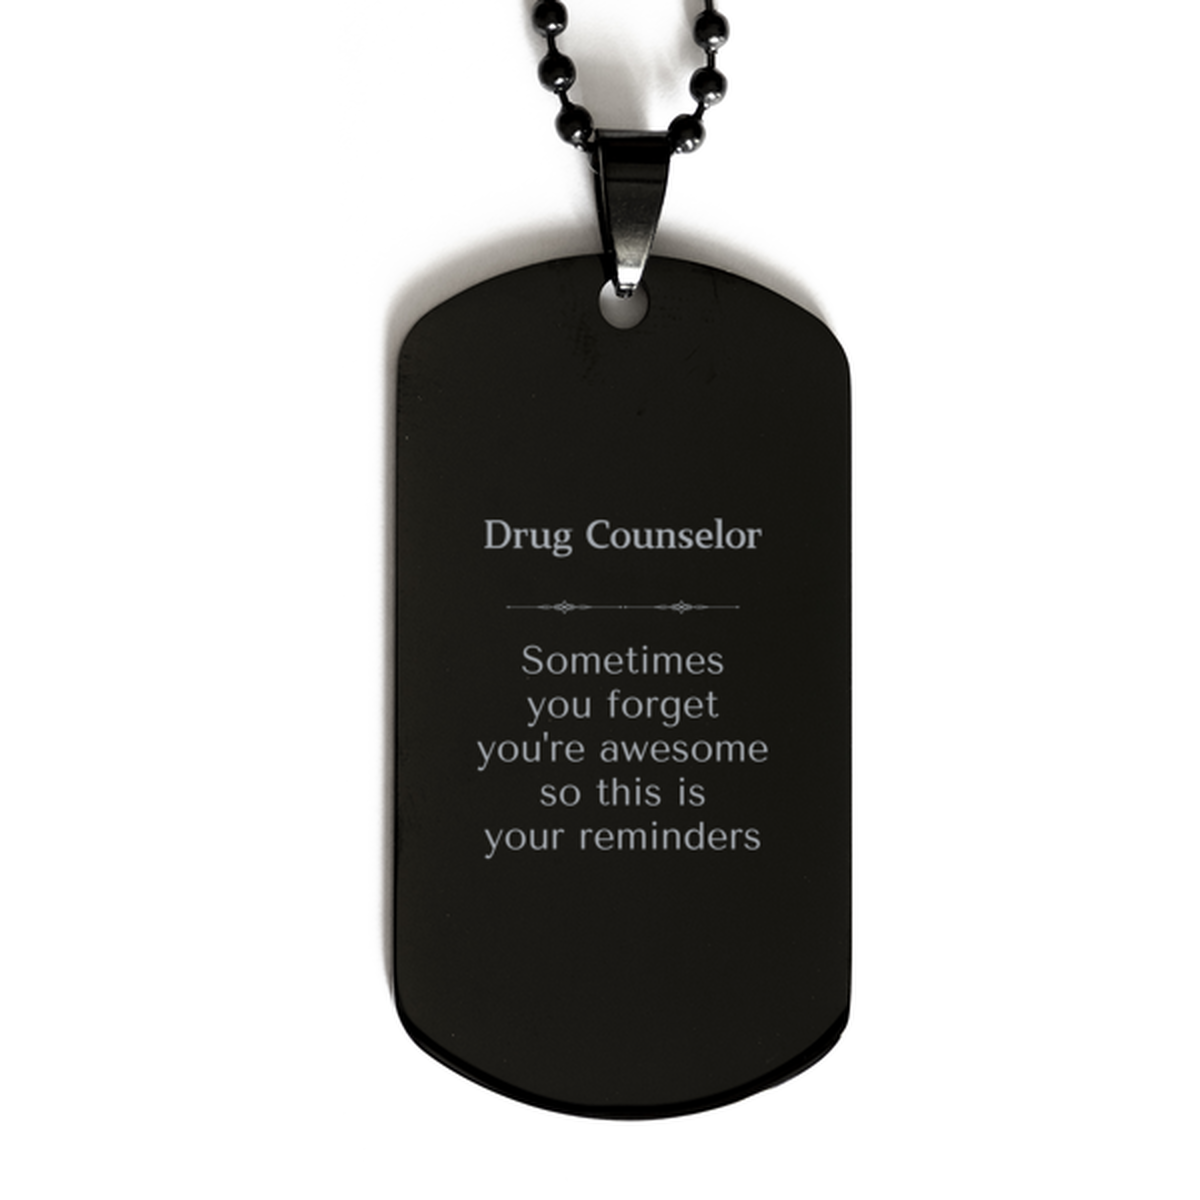 Sentimental Drug Counselor Black Dog Tag, Drug Counselor Sometimes you forget you're awesome so this is your reminders, Graduation Christmas Birthday Gifts for Drug Counselor, Men, Women, Coworkers